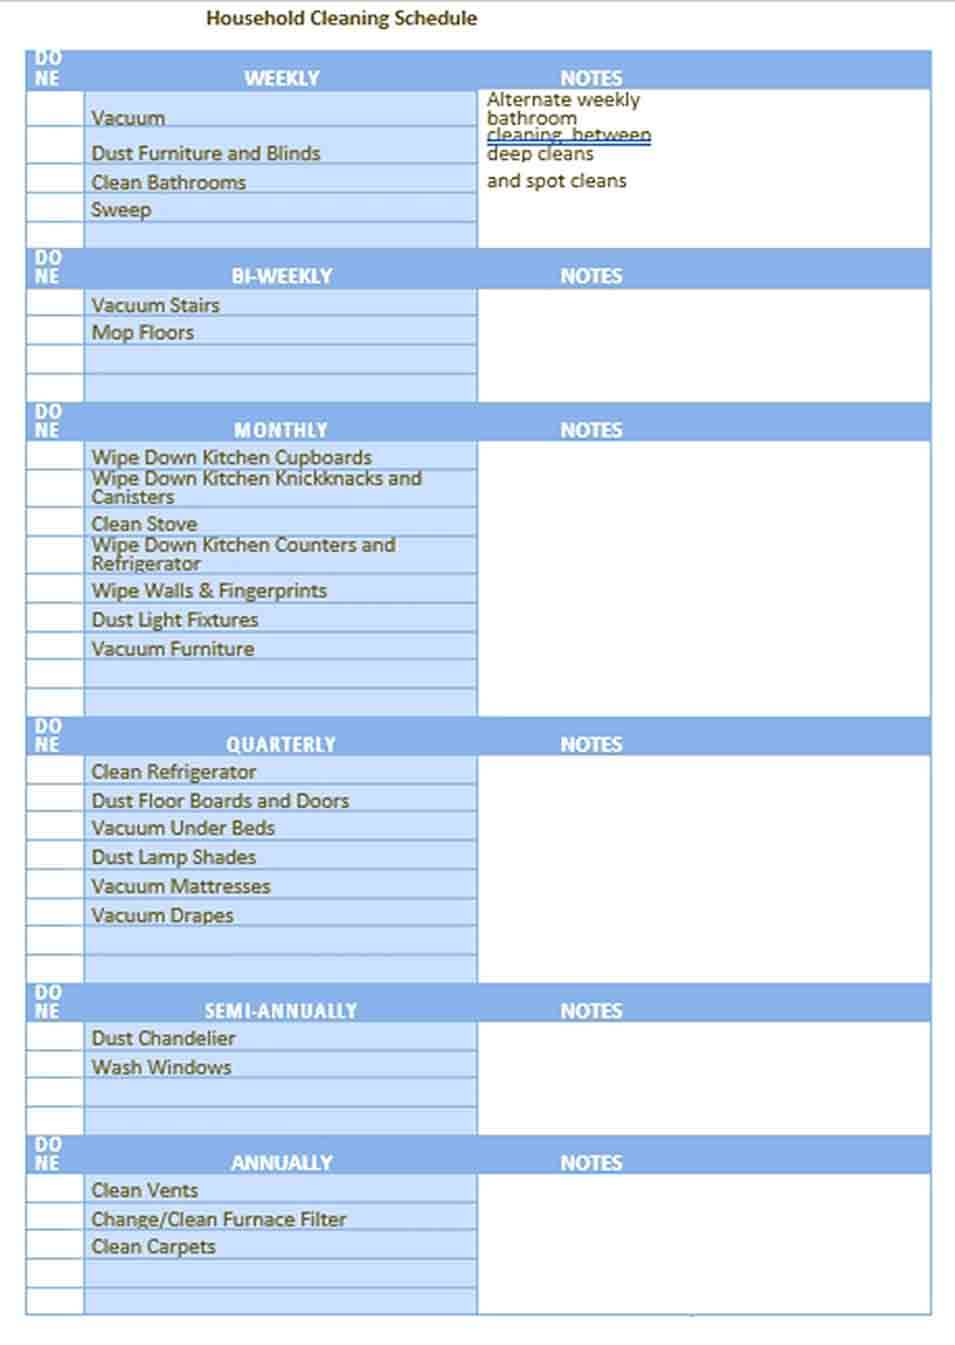 Weekly House Cleaning Schedule